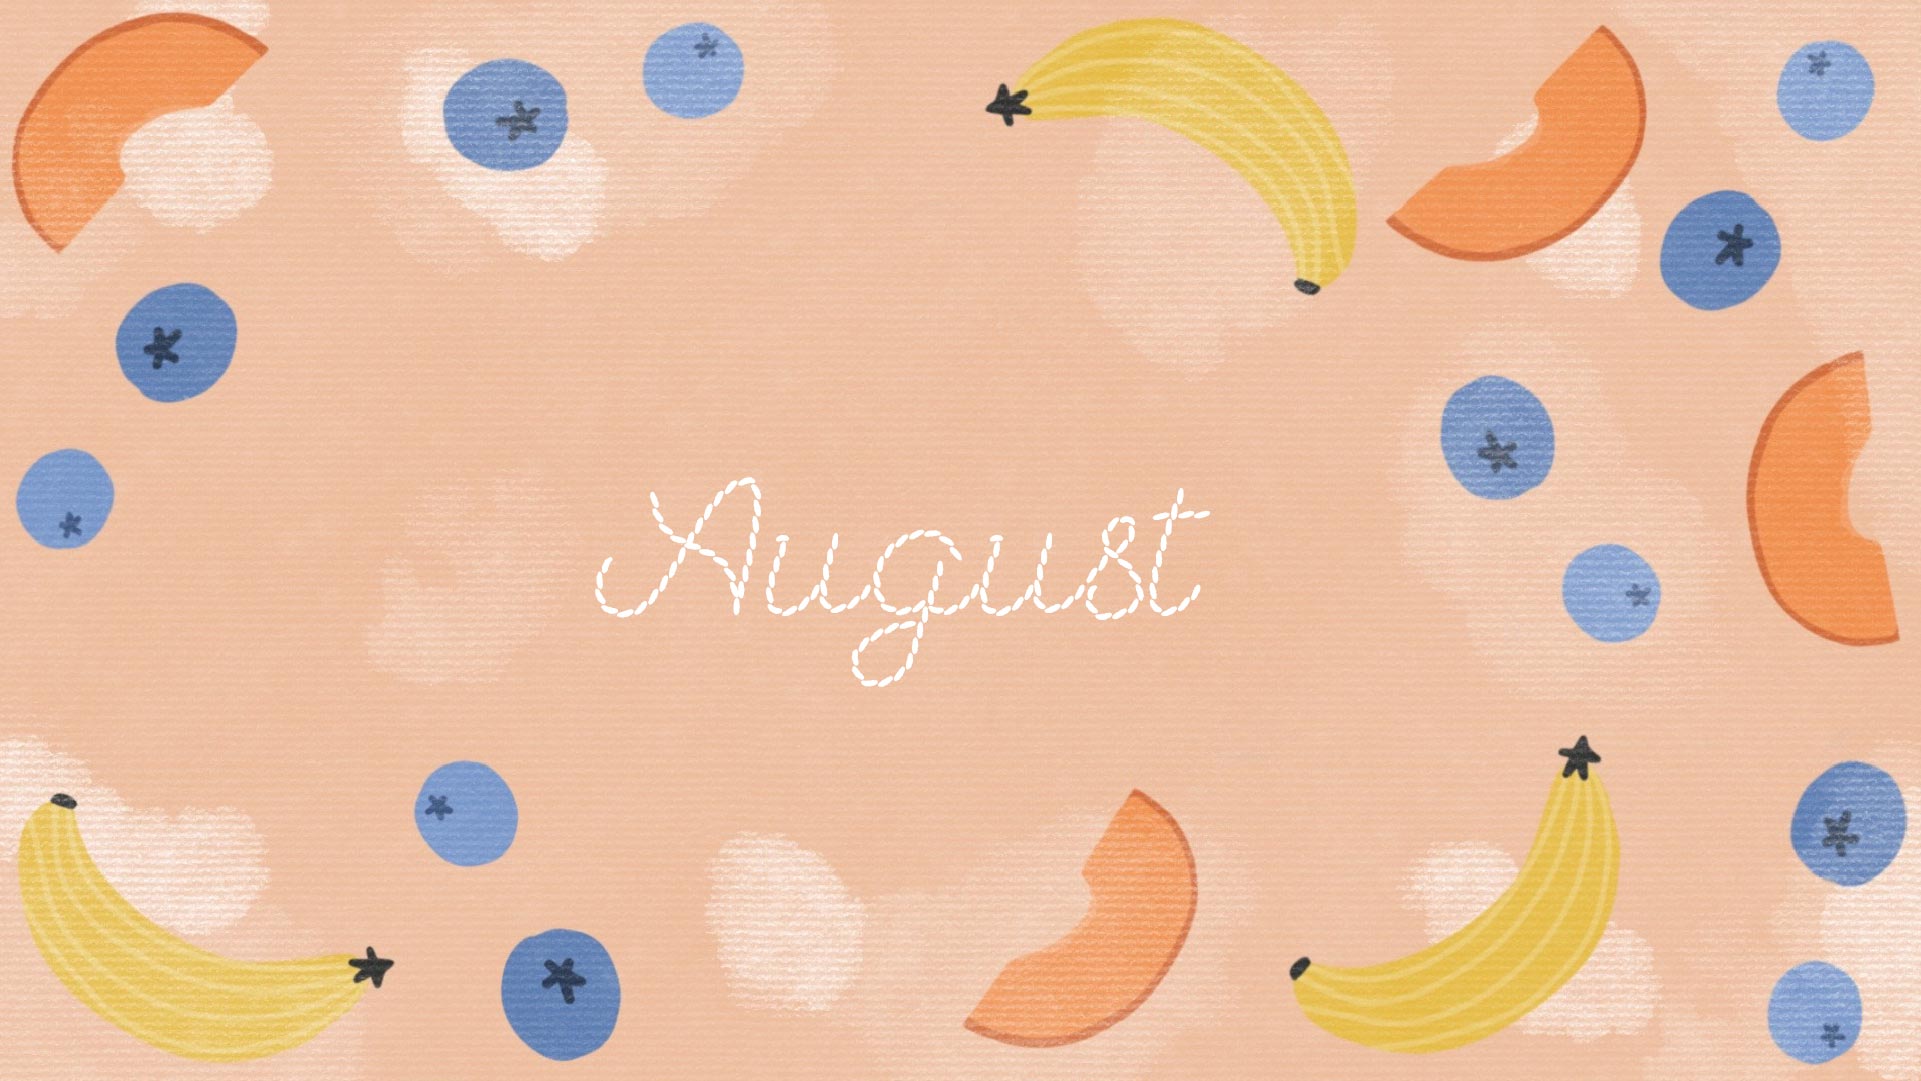 August wallpaper with blueberries and bananas on a peach background - August